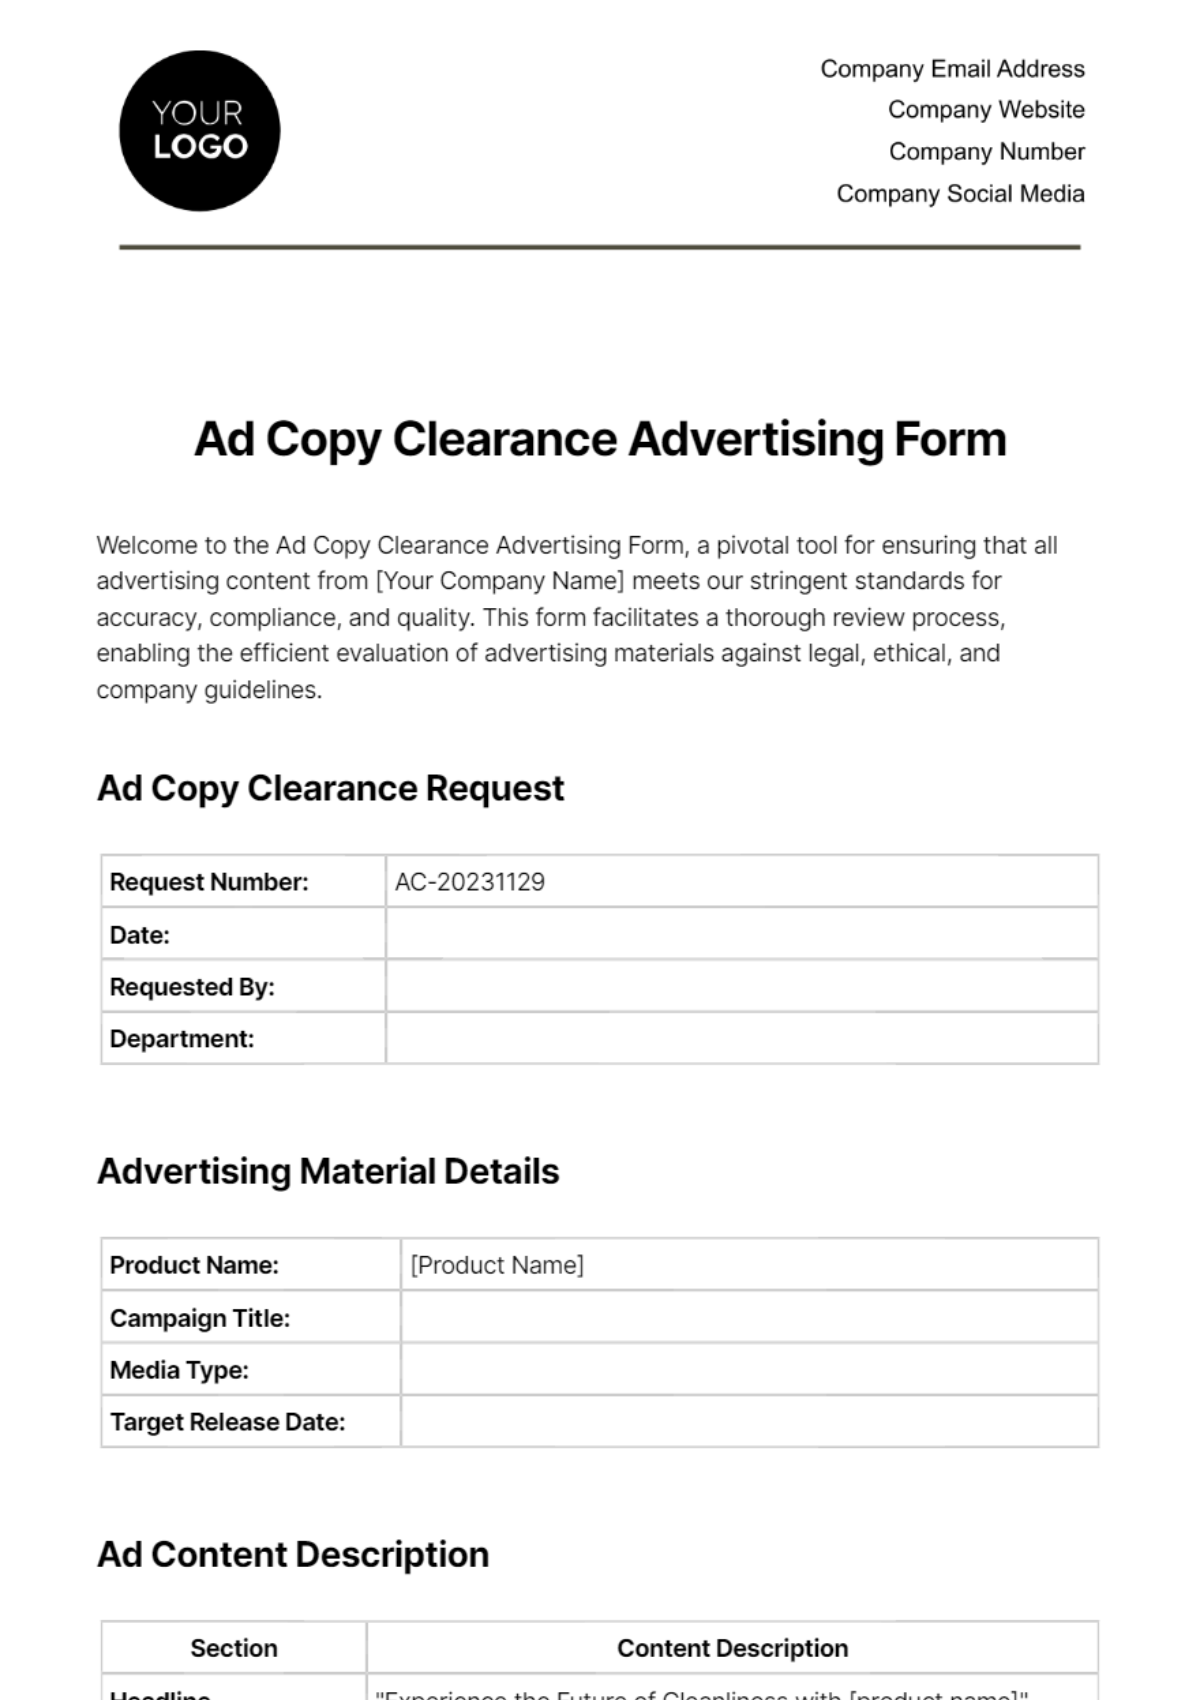 Free Ad Copy Clearance Advertising Form Template